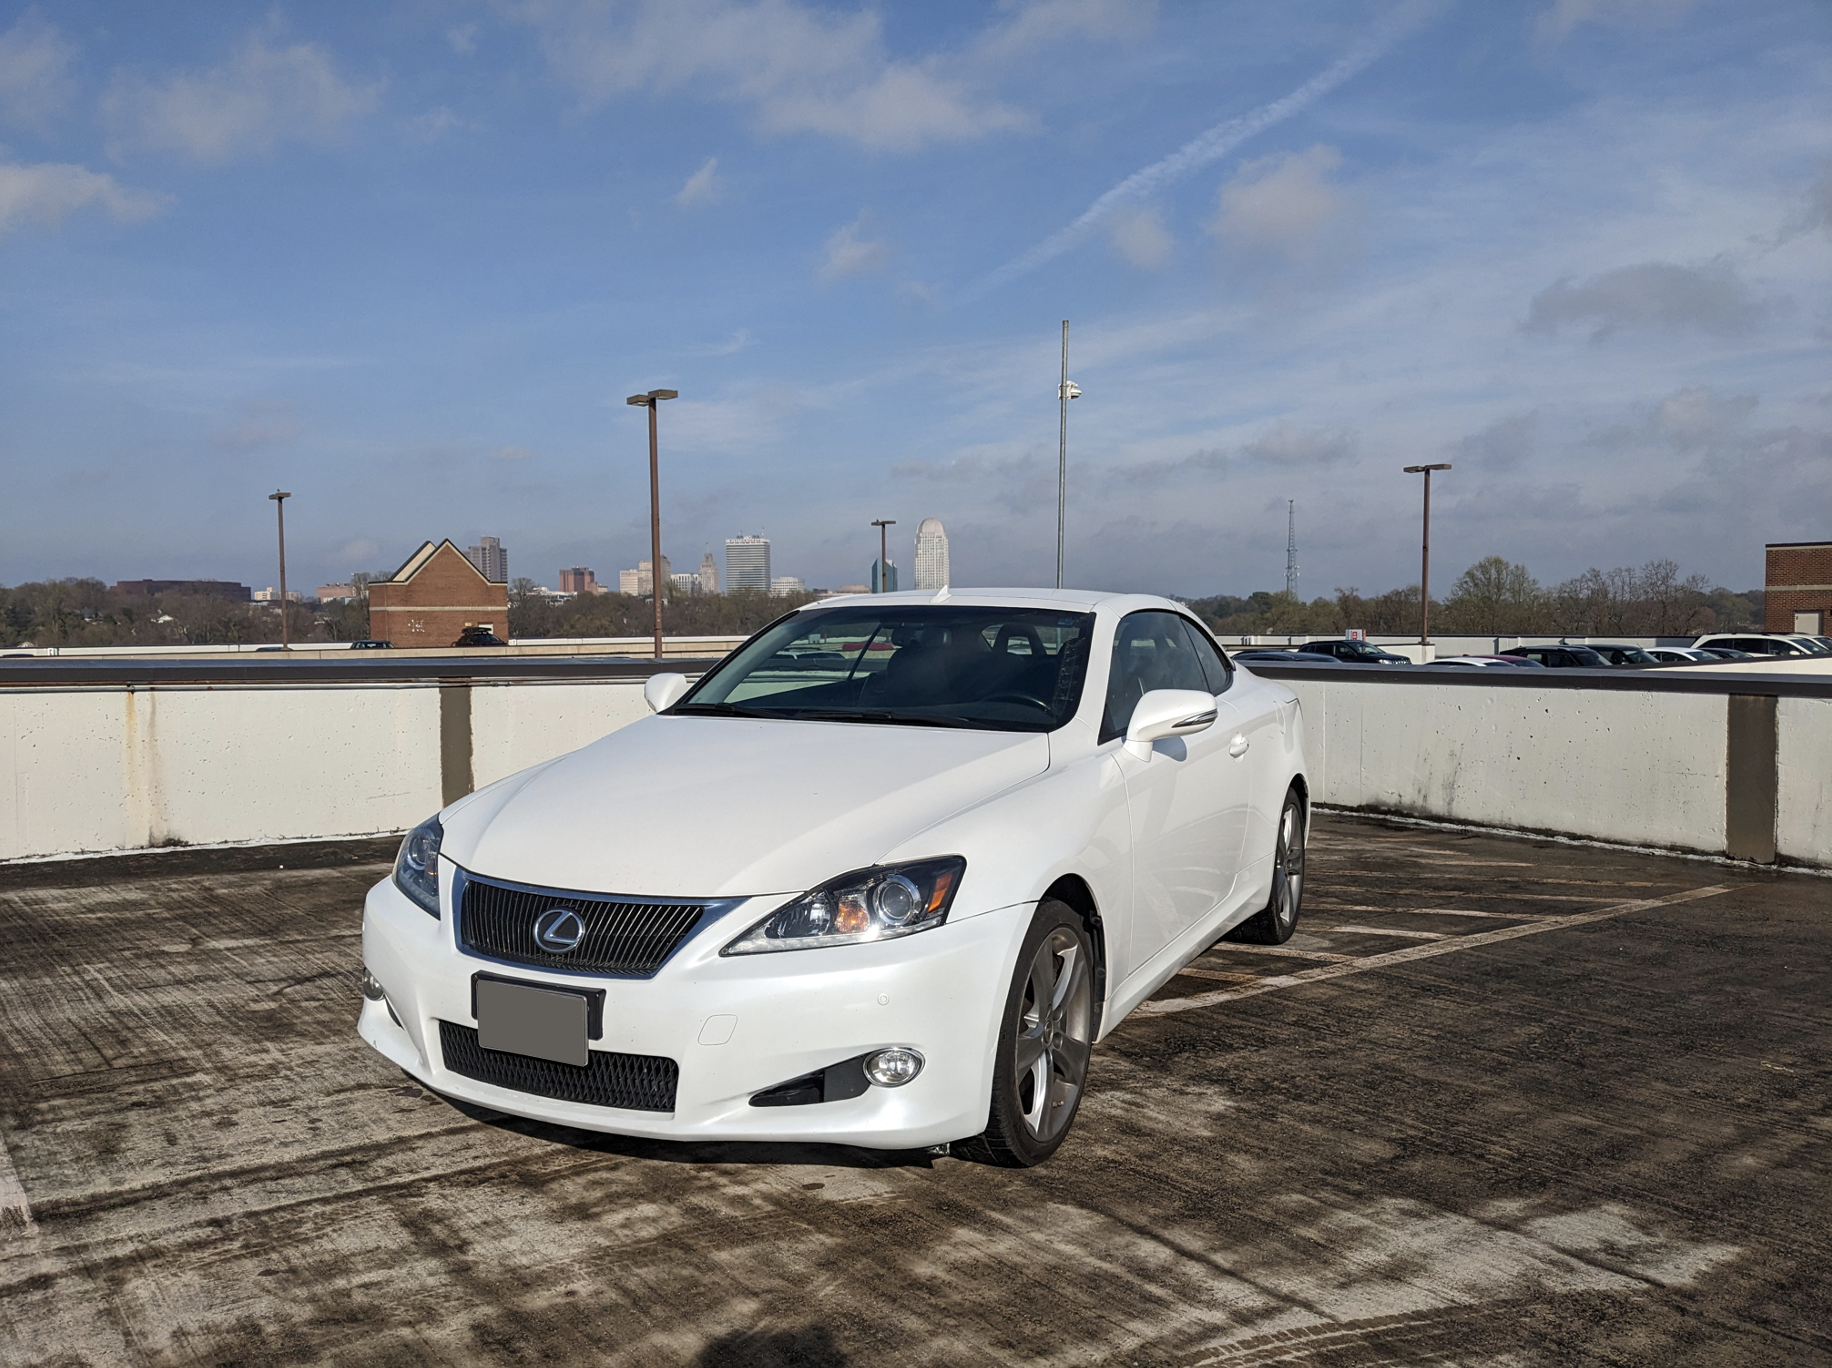 Used Lexus IS 350C for Sale Near Me in Greensboro, NC - Autotrader